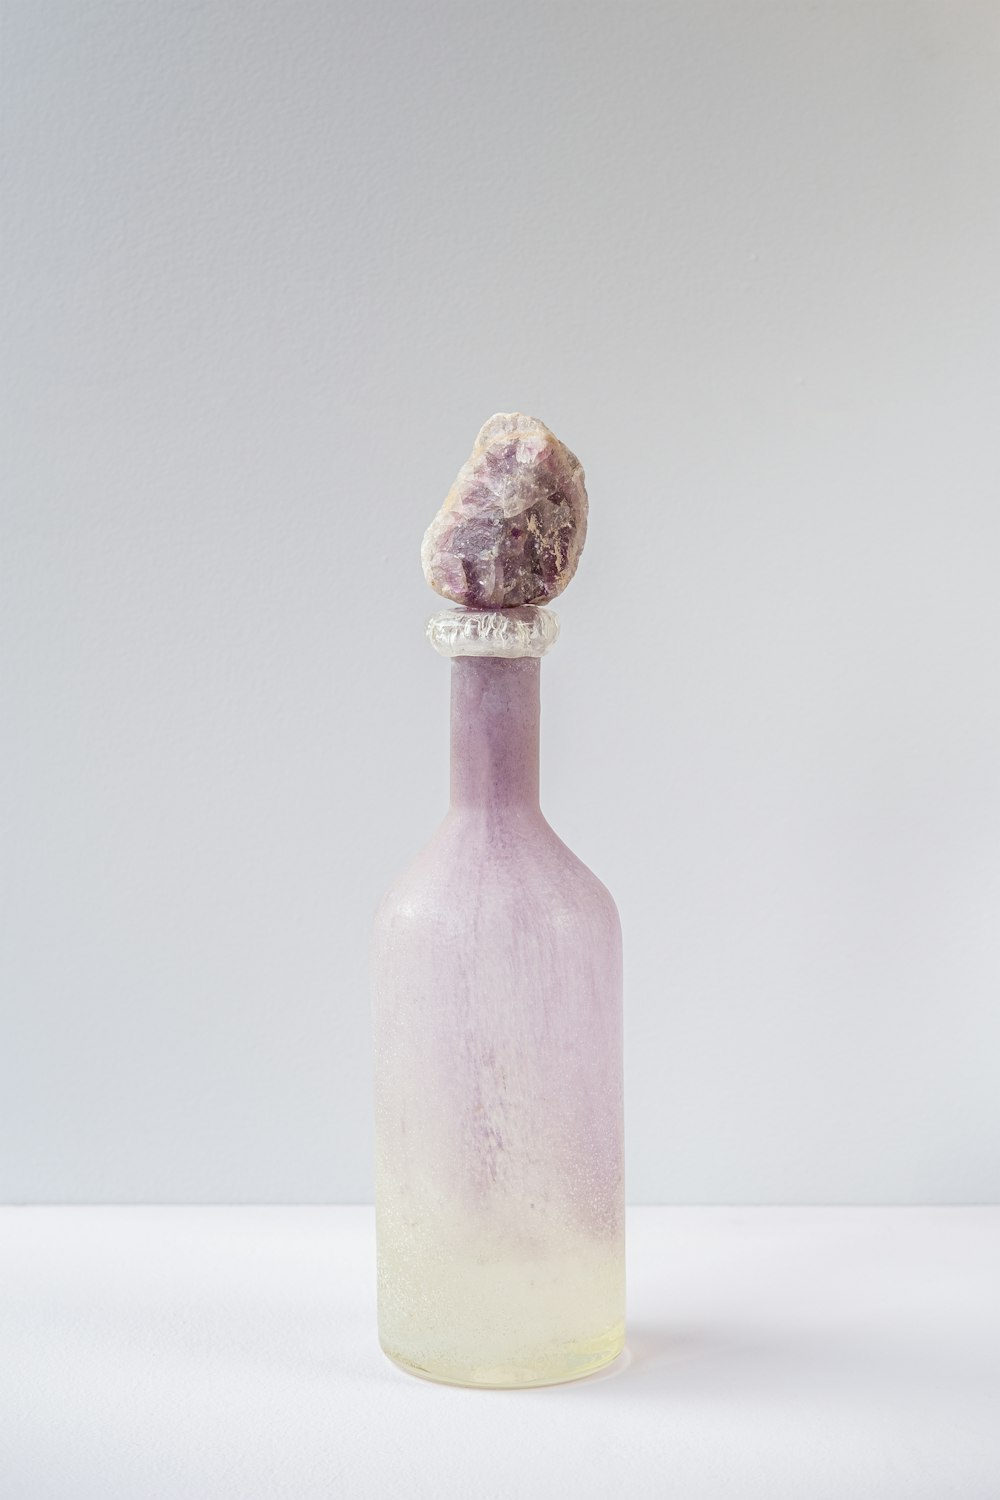 a bottle with a rock in it sitting on a table